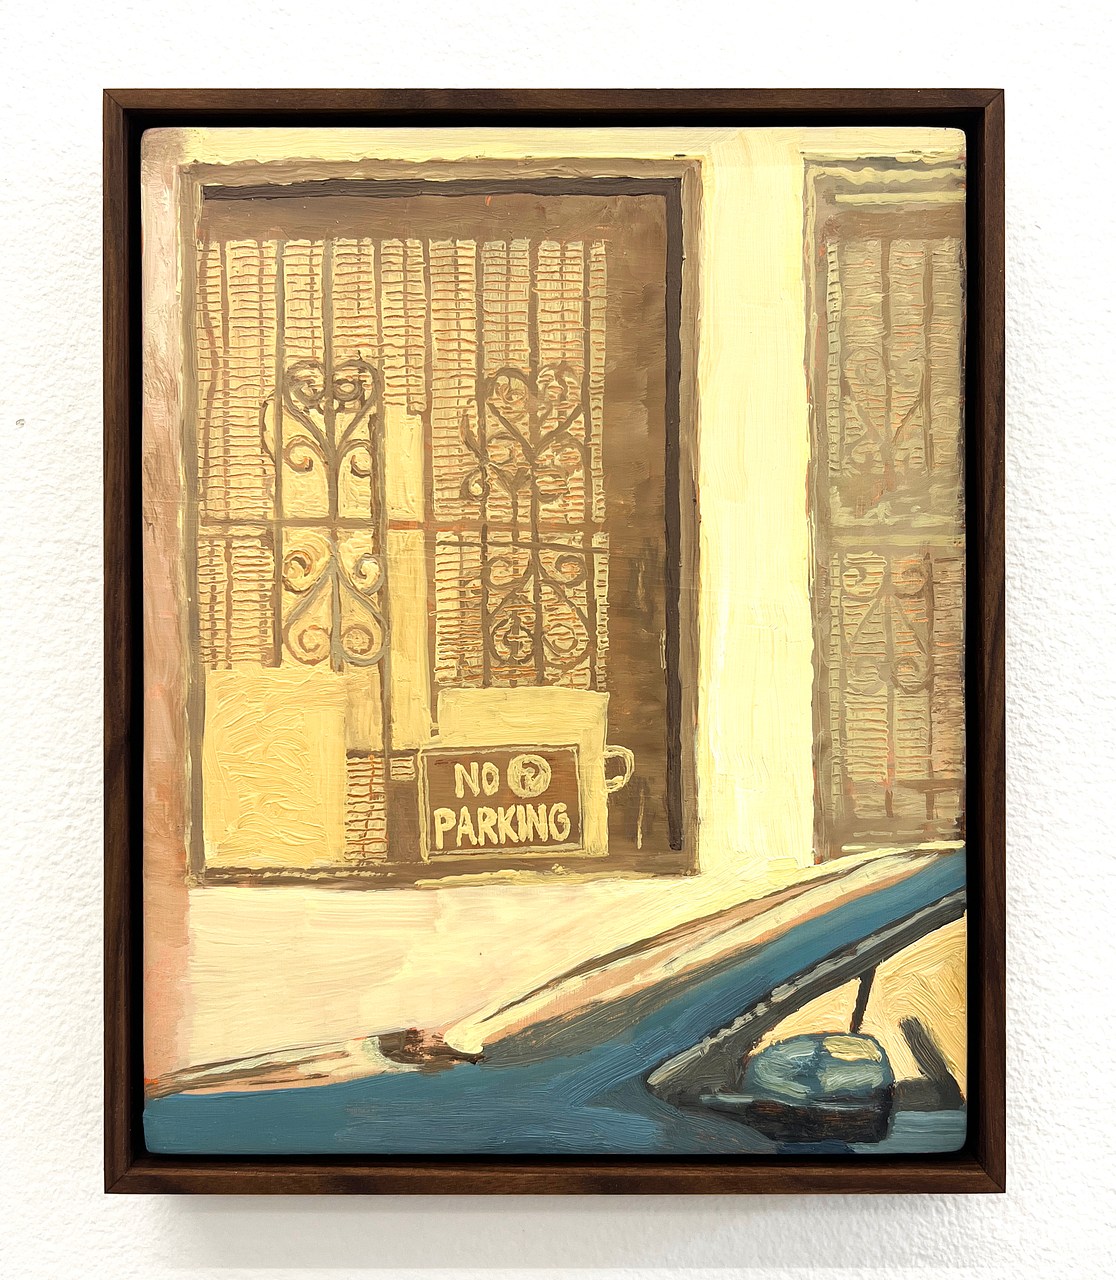 Painting of iron-grate covered window with a "no parking" sign, yellow tinge over blue car in foreground